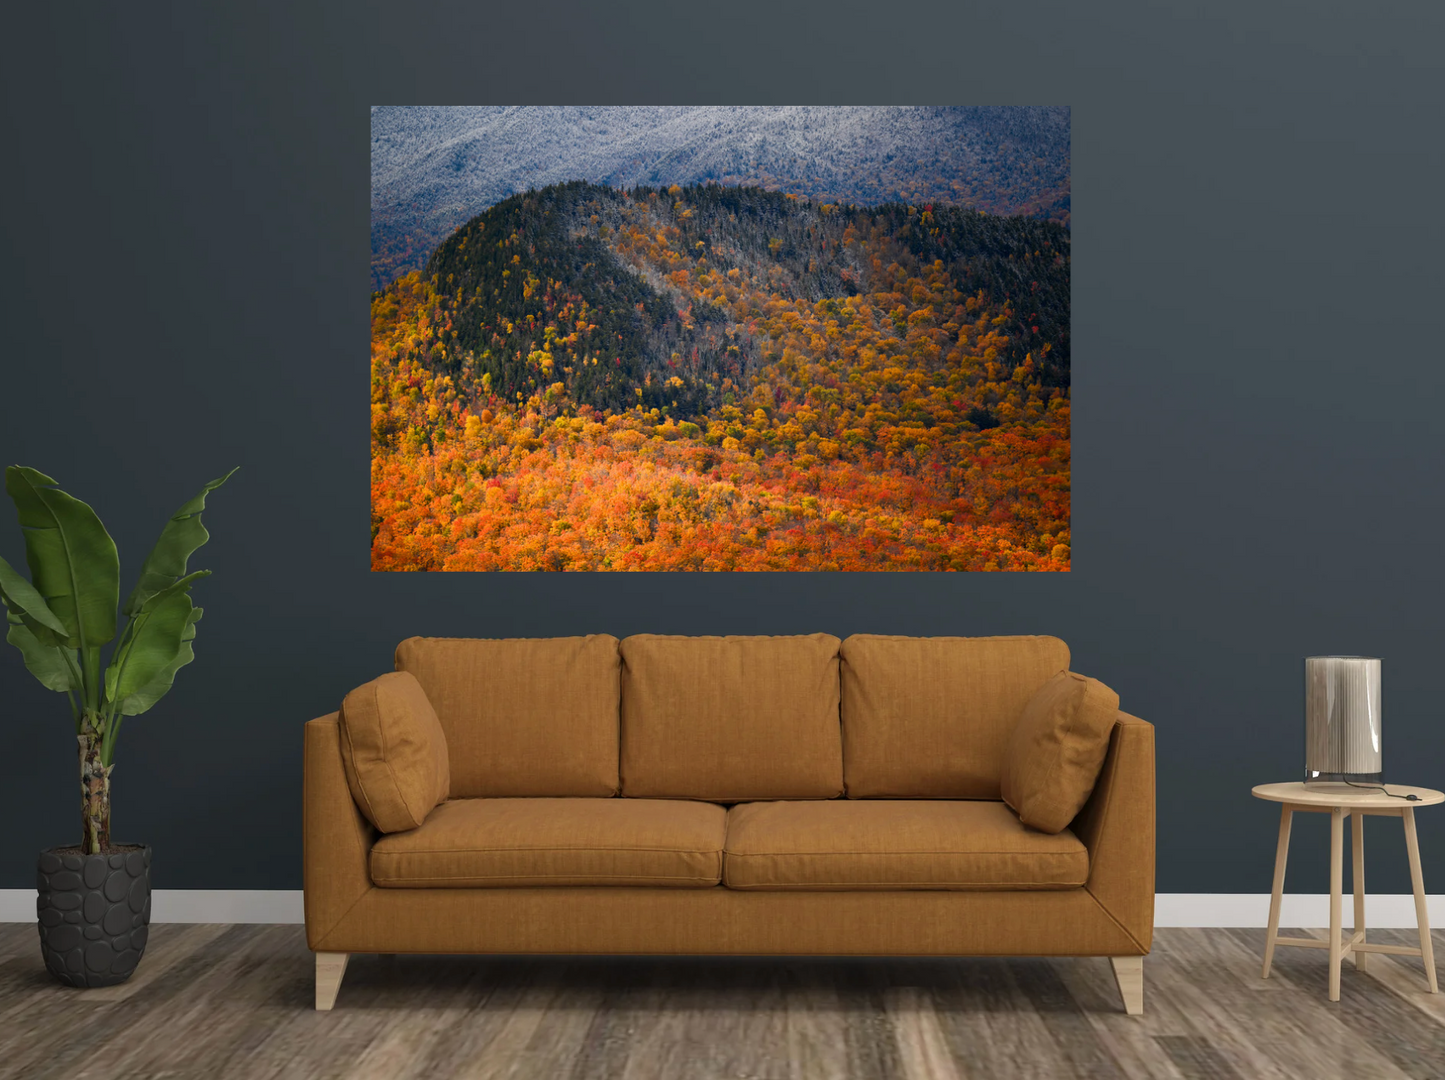 print of Freshly Fallen Snow and Fall Foliage